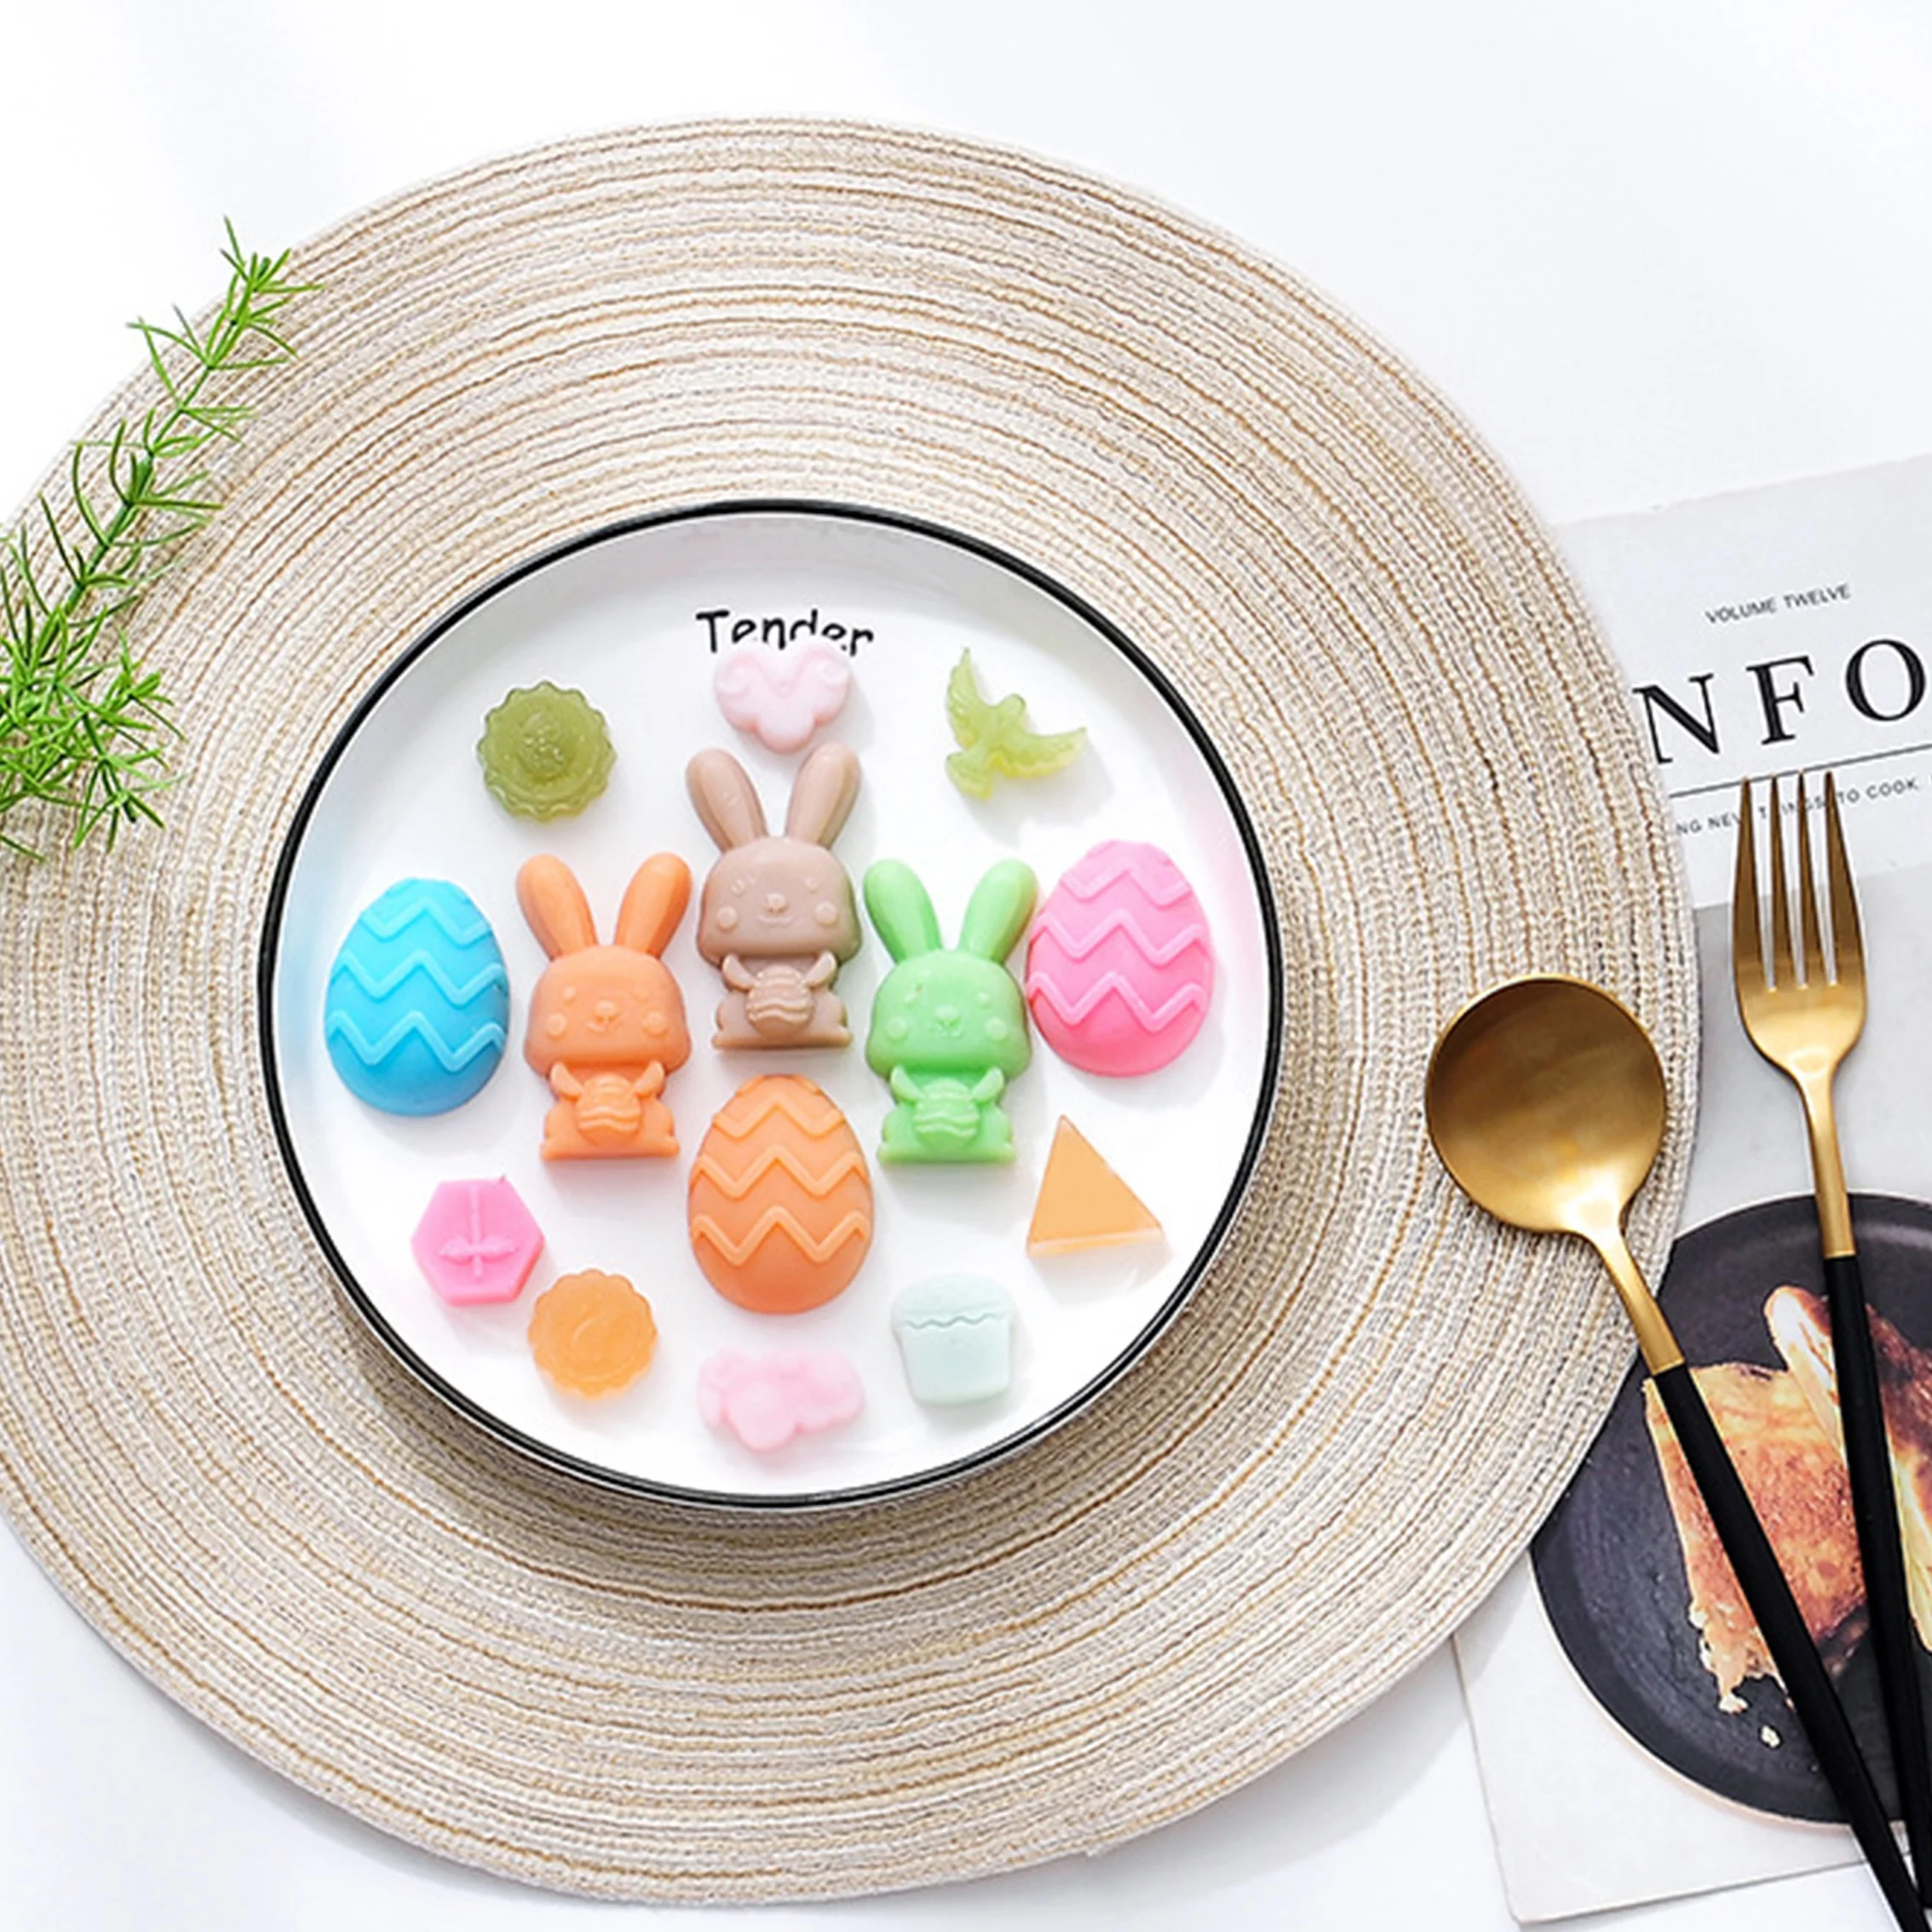 Hot Selling Easter Rabbit Egg Shaped Silicone Cake Mold Soap Mold Chocolate Molds Cake Tools kitchen tools